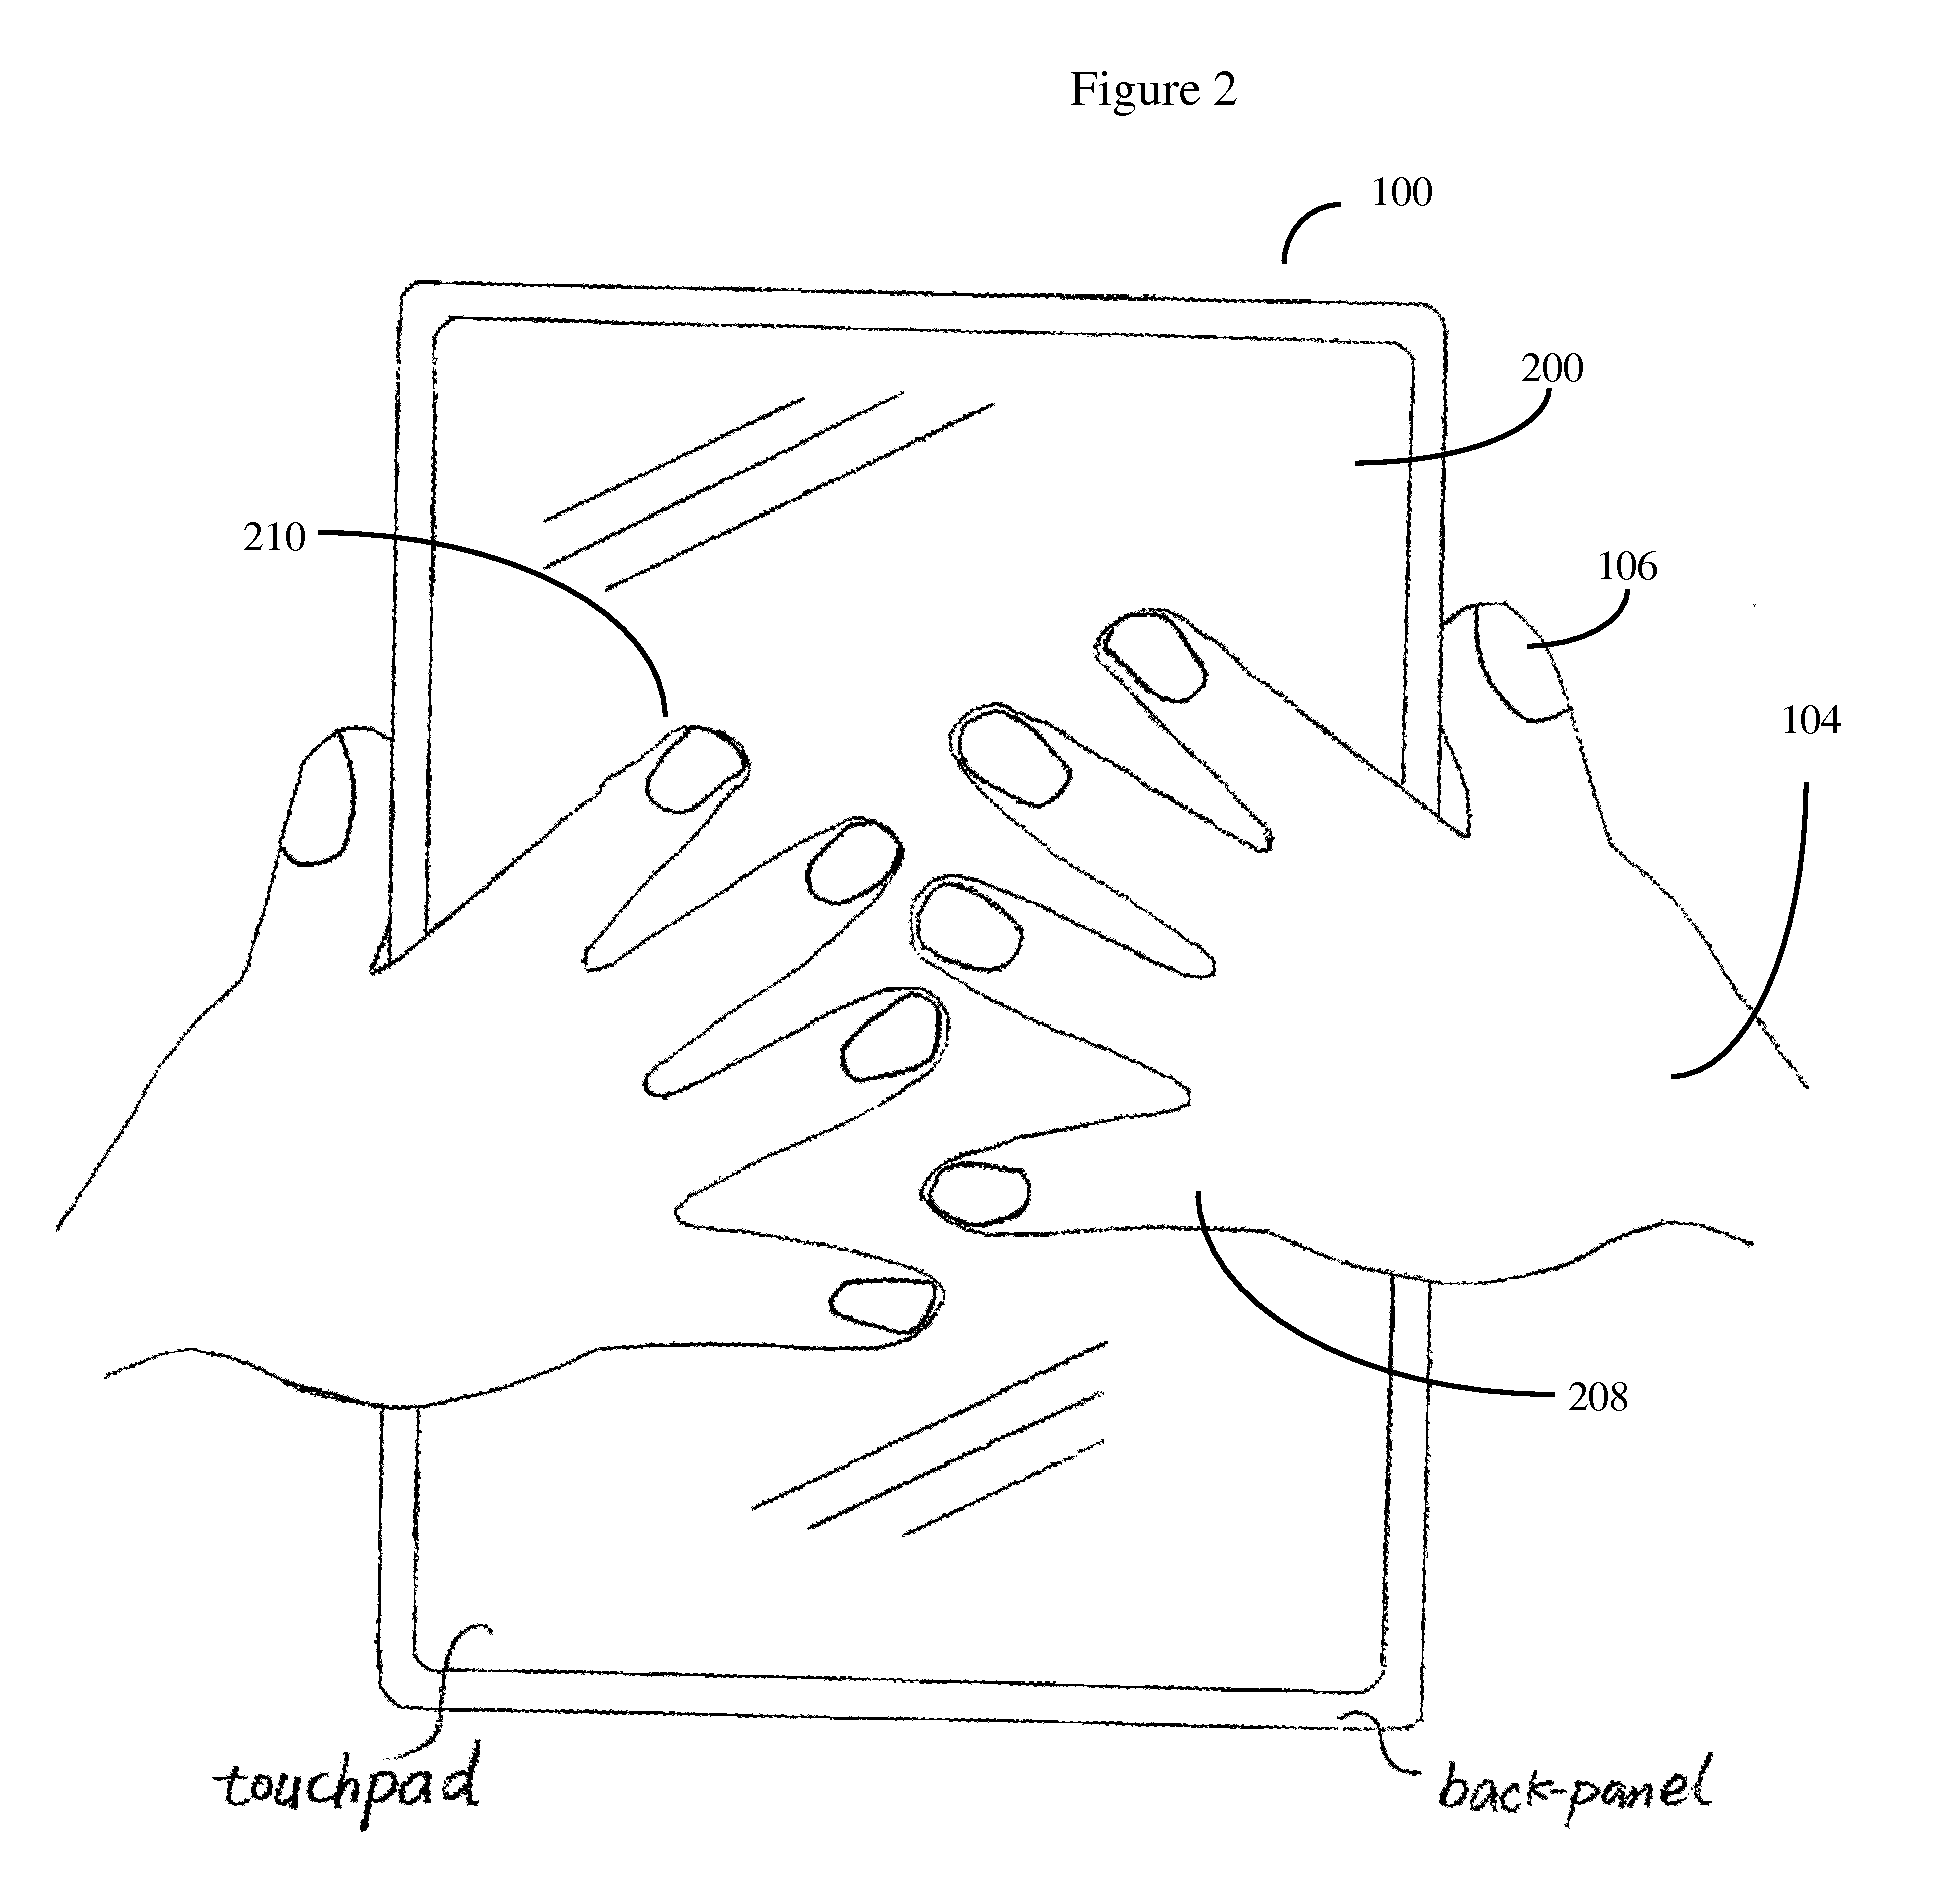 Method for user input from the back panel of a handheld computerized device